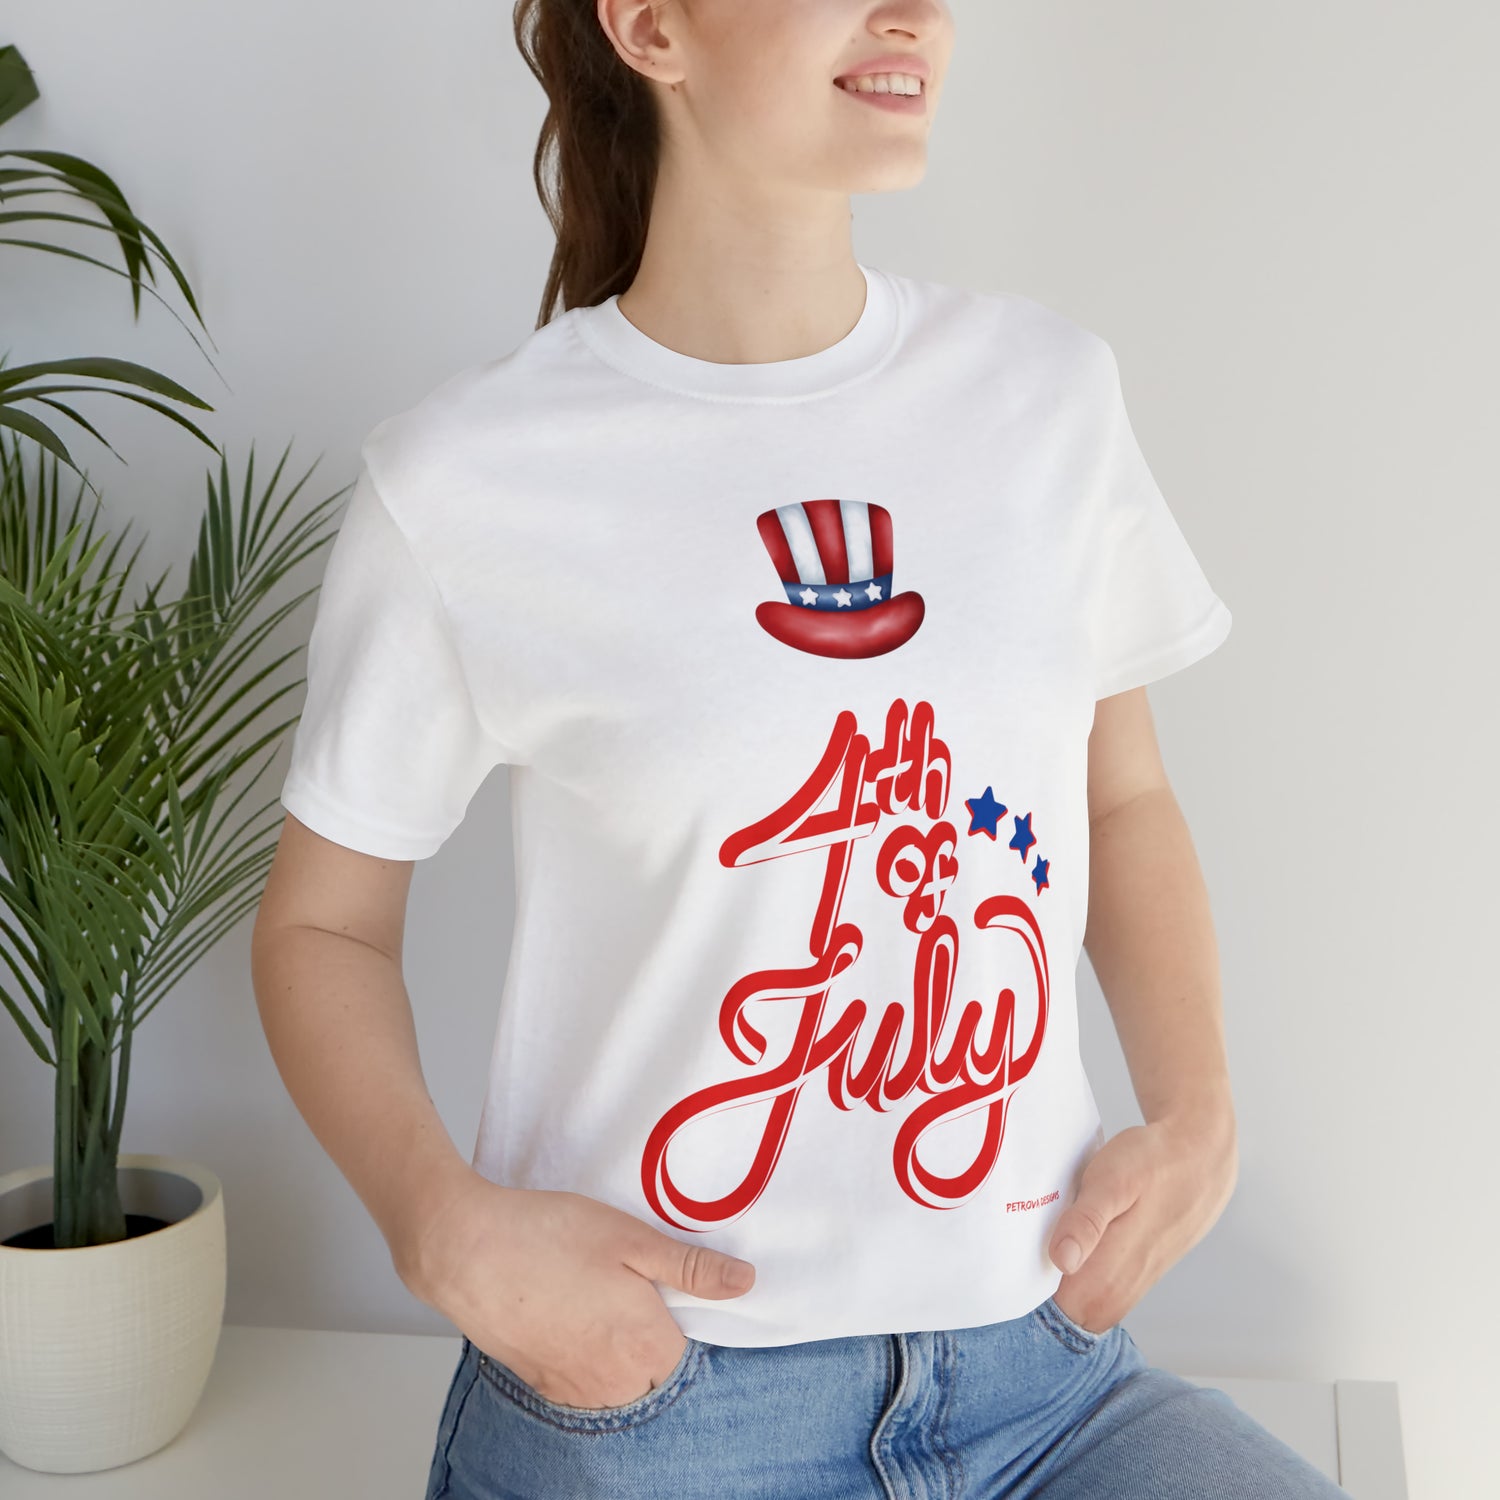 White T-Shirt Tshirt Design Gift for Friend and Family Short Sleeved Shirt 4th of July Independence Day Petrova Designs